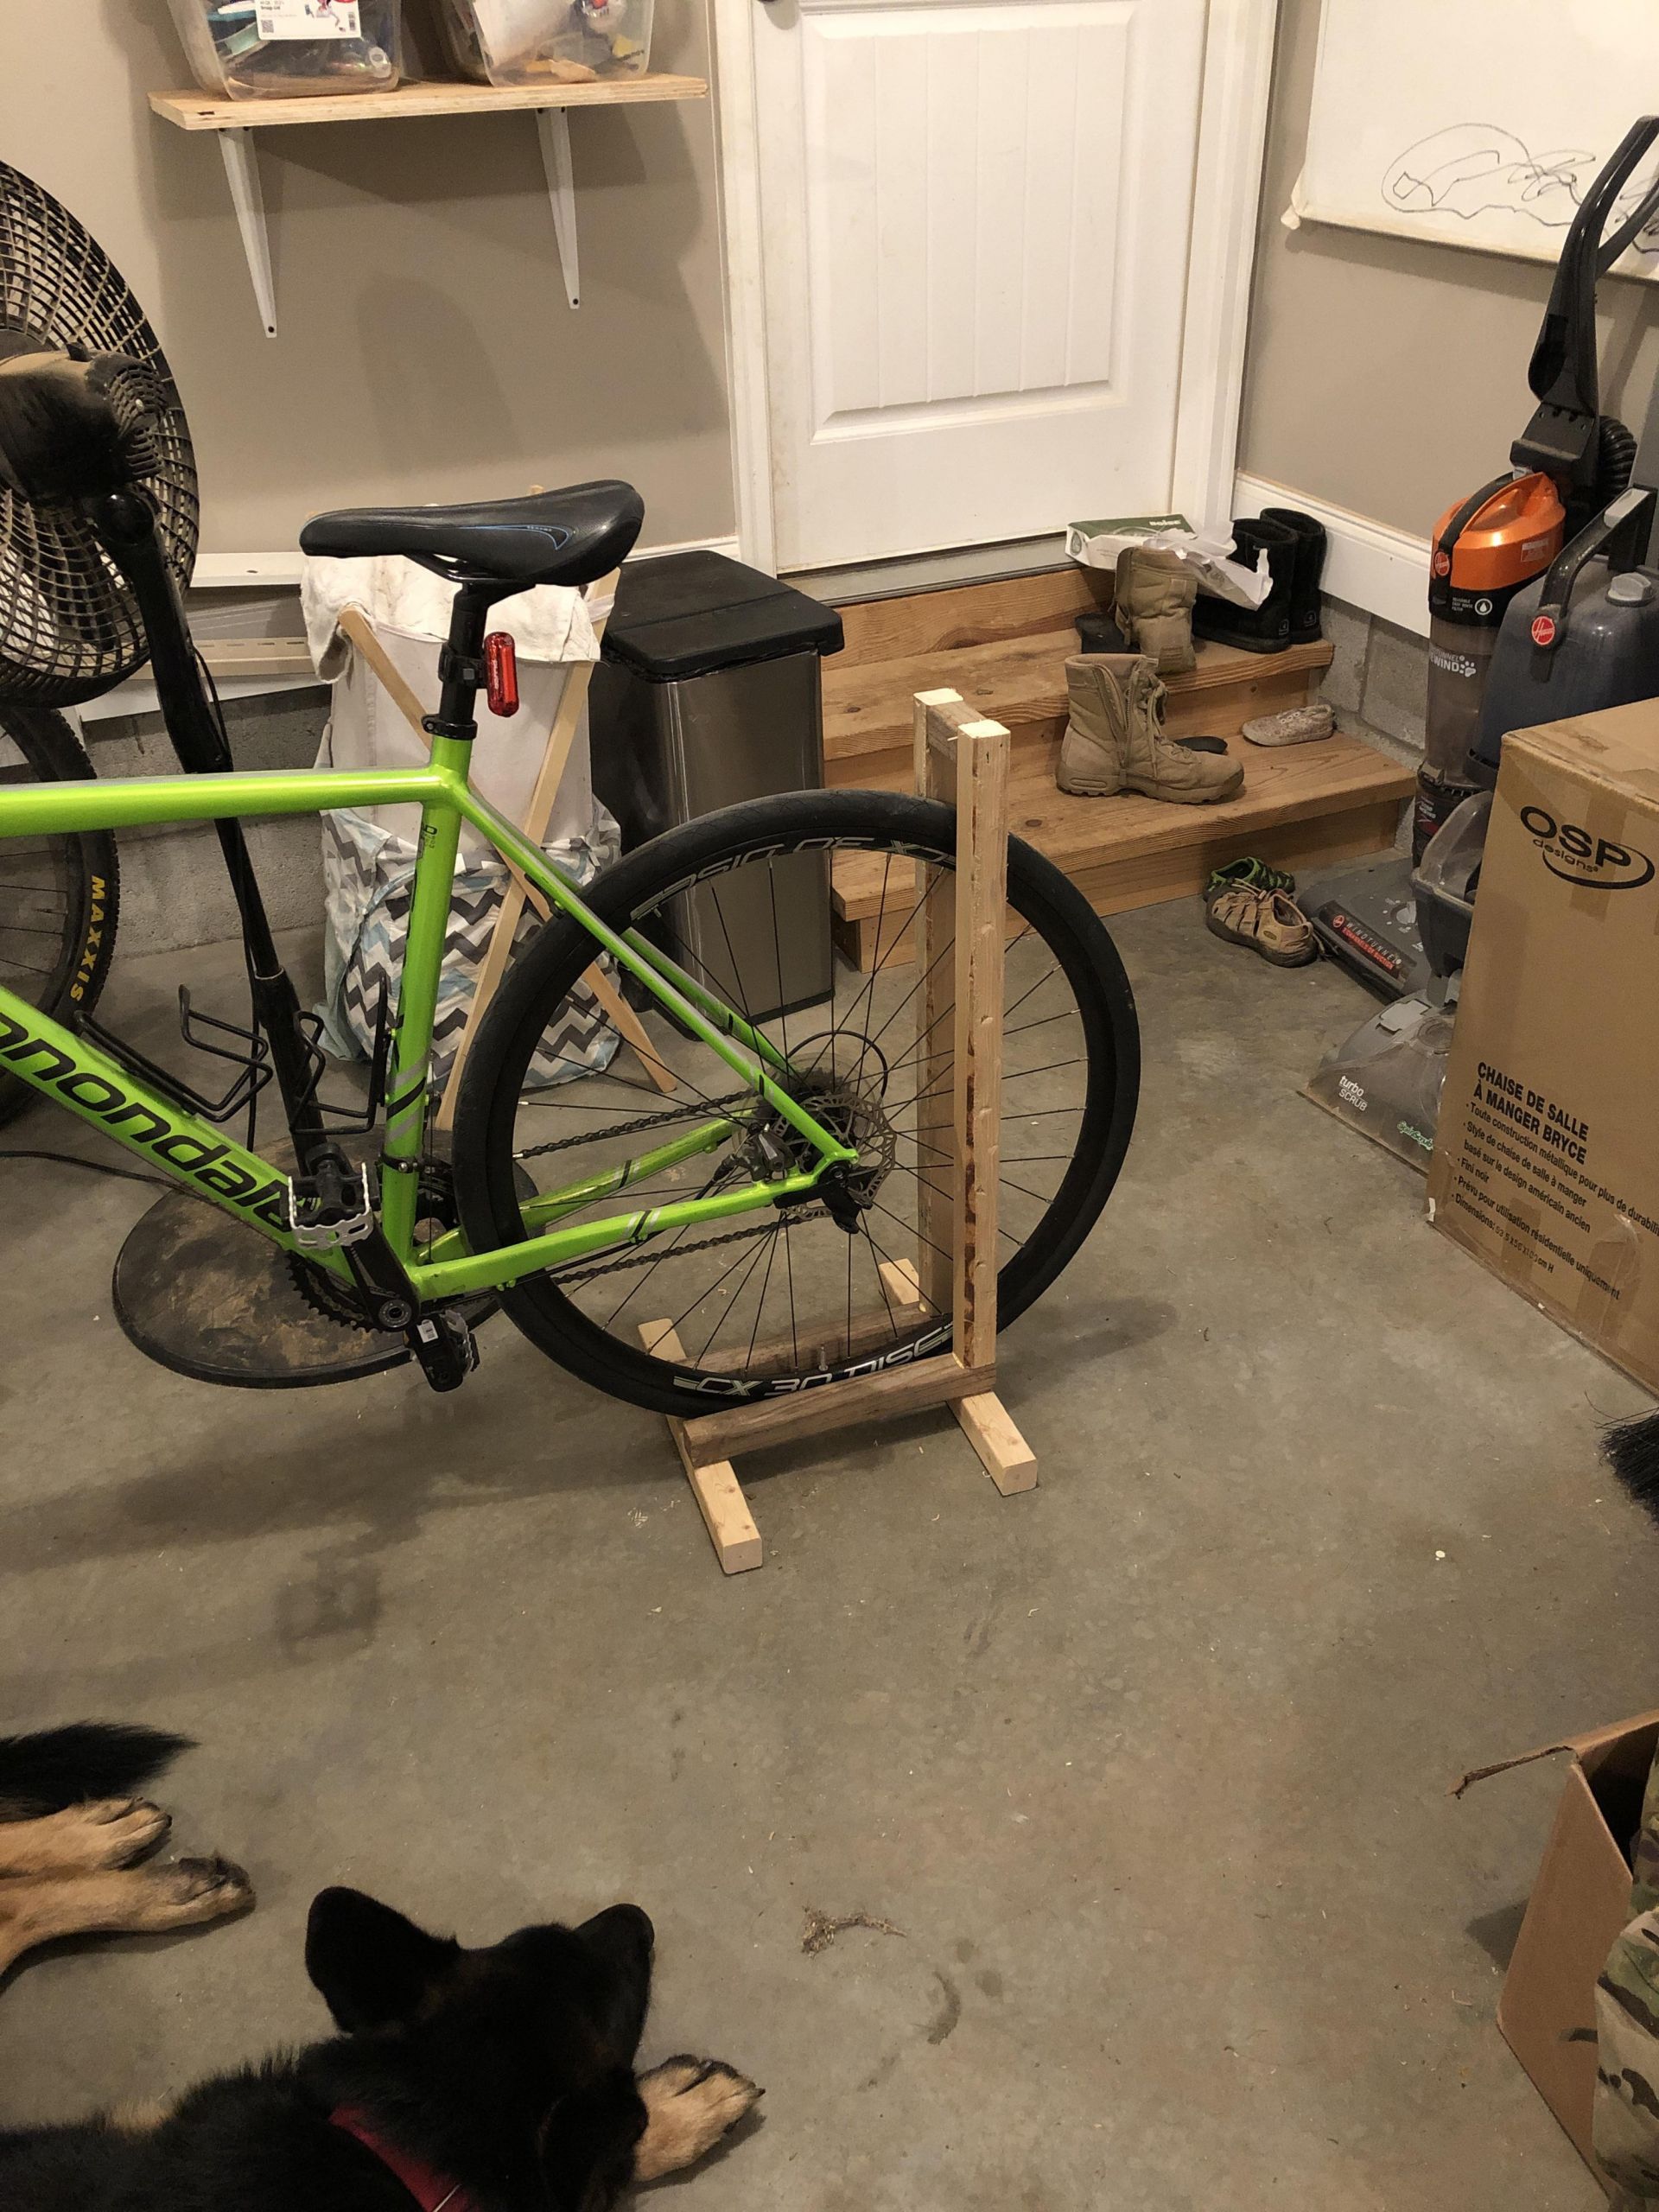 DIY Motorcycle Stand Wood
 Diy bike stand Saved about $27 not letting my wife